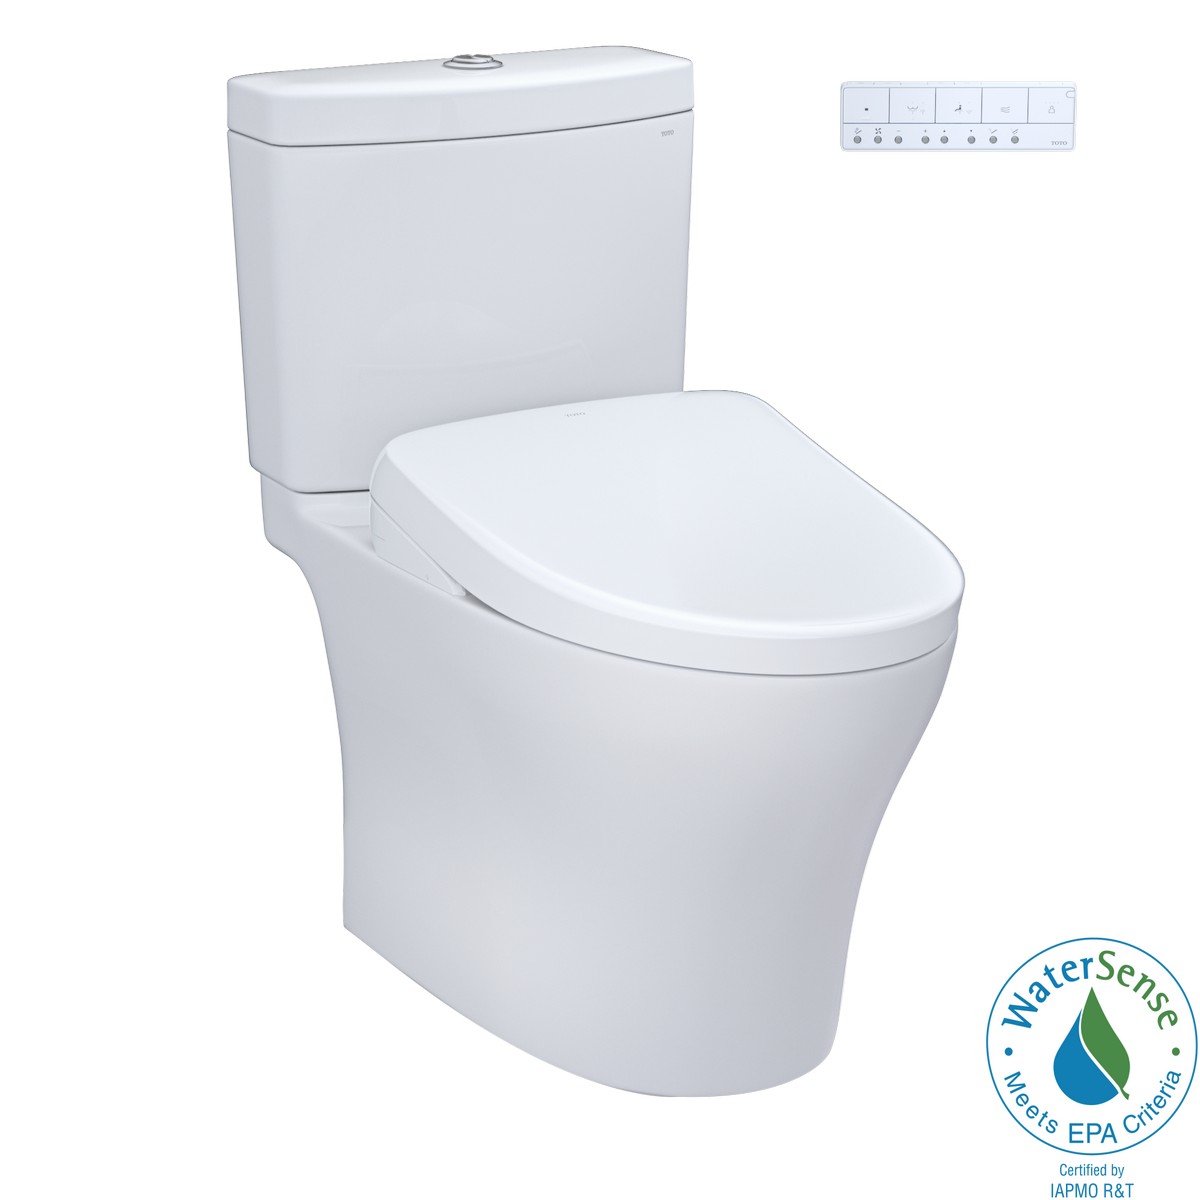 TOTO MW4464736CEMFG#01 WASHLET+ AQUIA IV 1.28 AND 0.9 GPF TWO PIECE DUAL FLUSH ELONGATED TOILET WITH WASHLET S7A BIDET SEAT IN COTTON WHITE